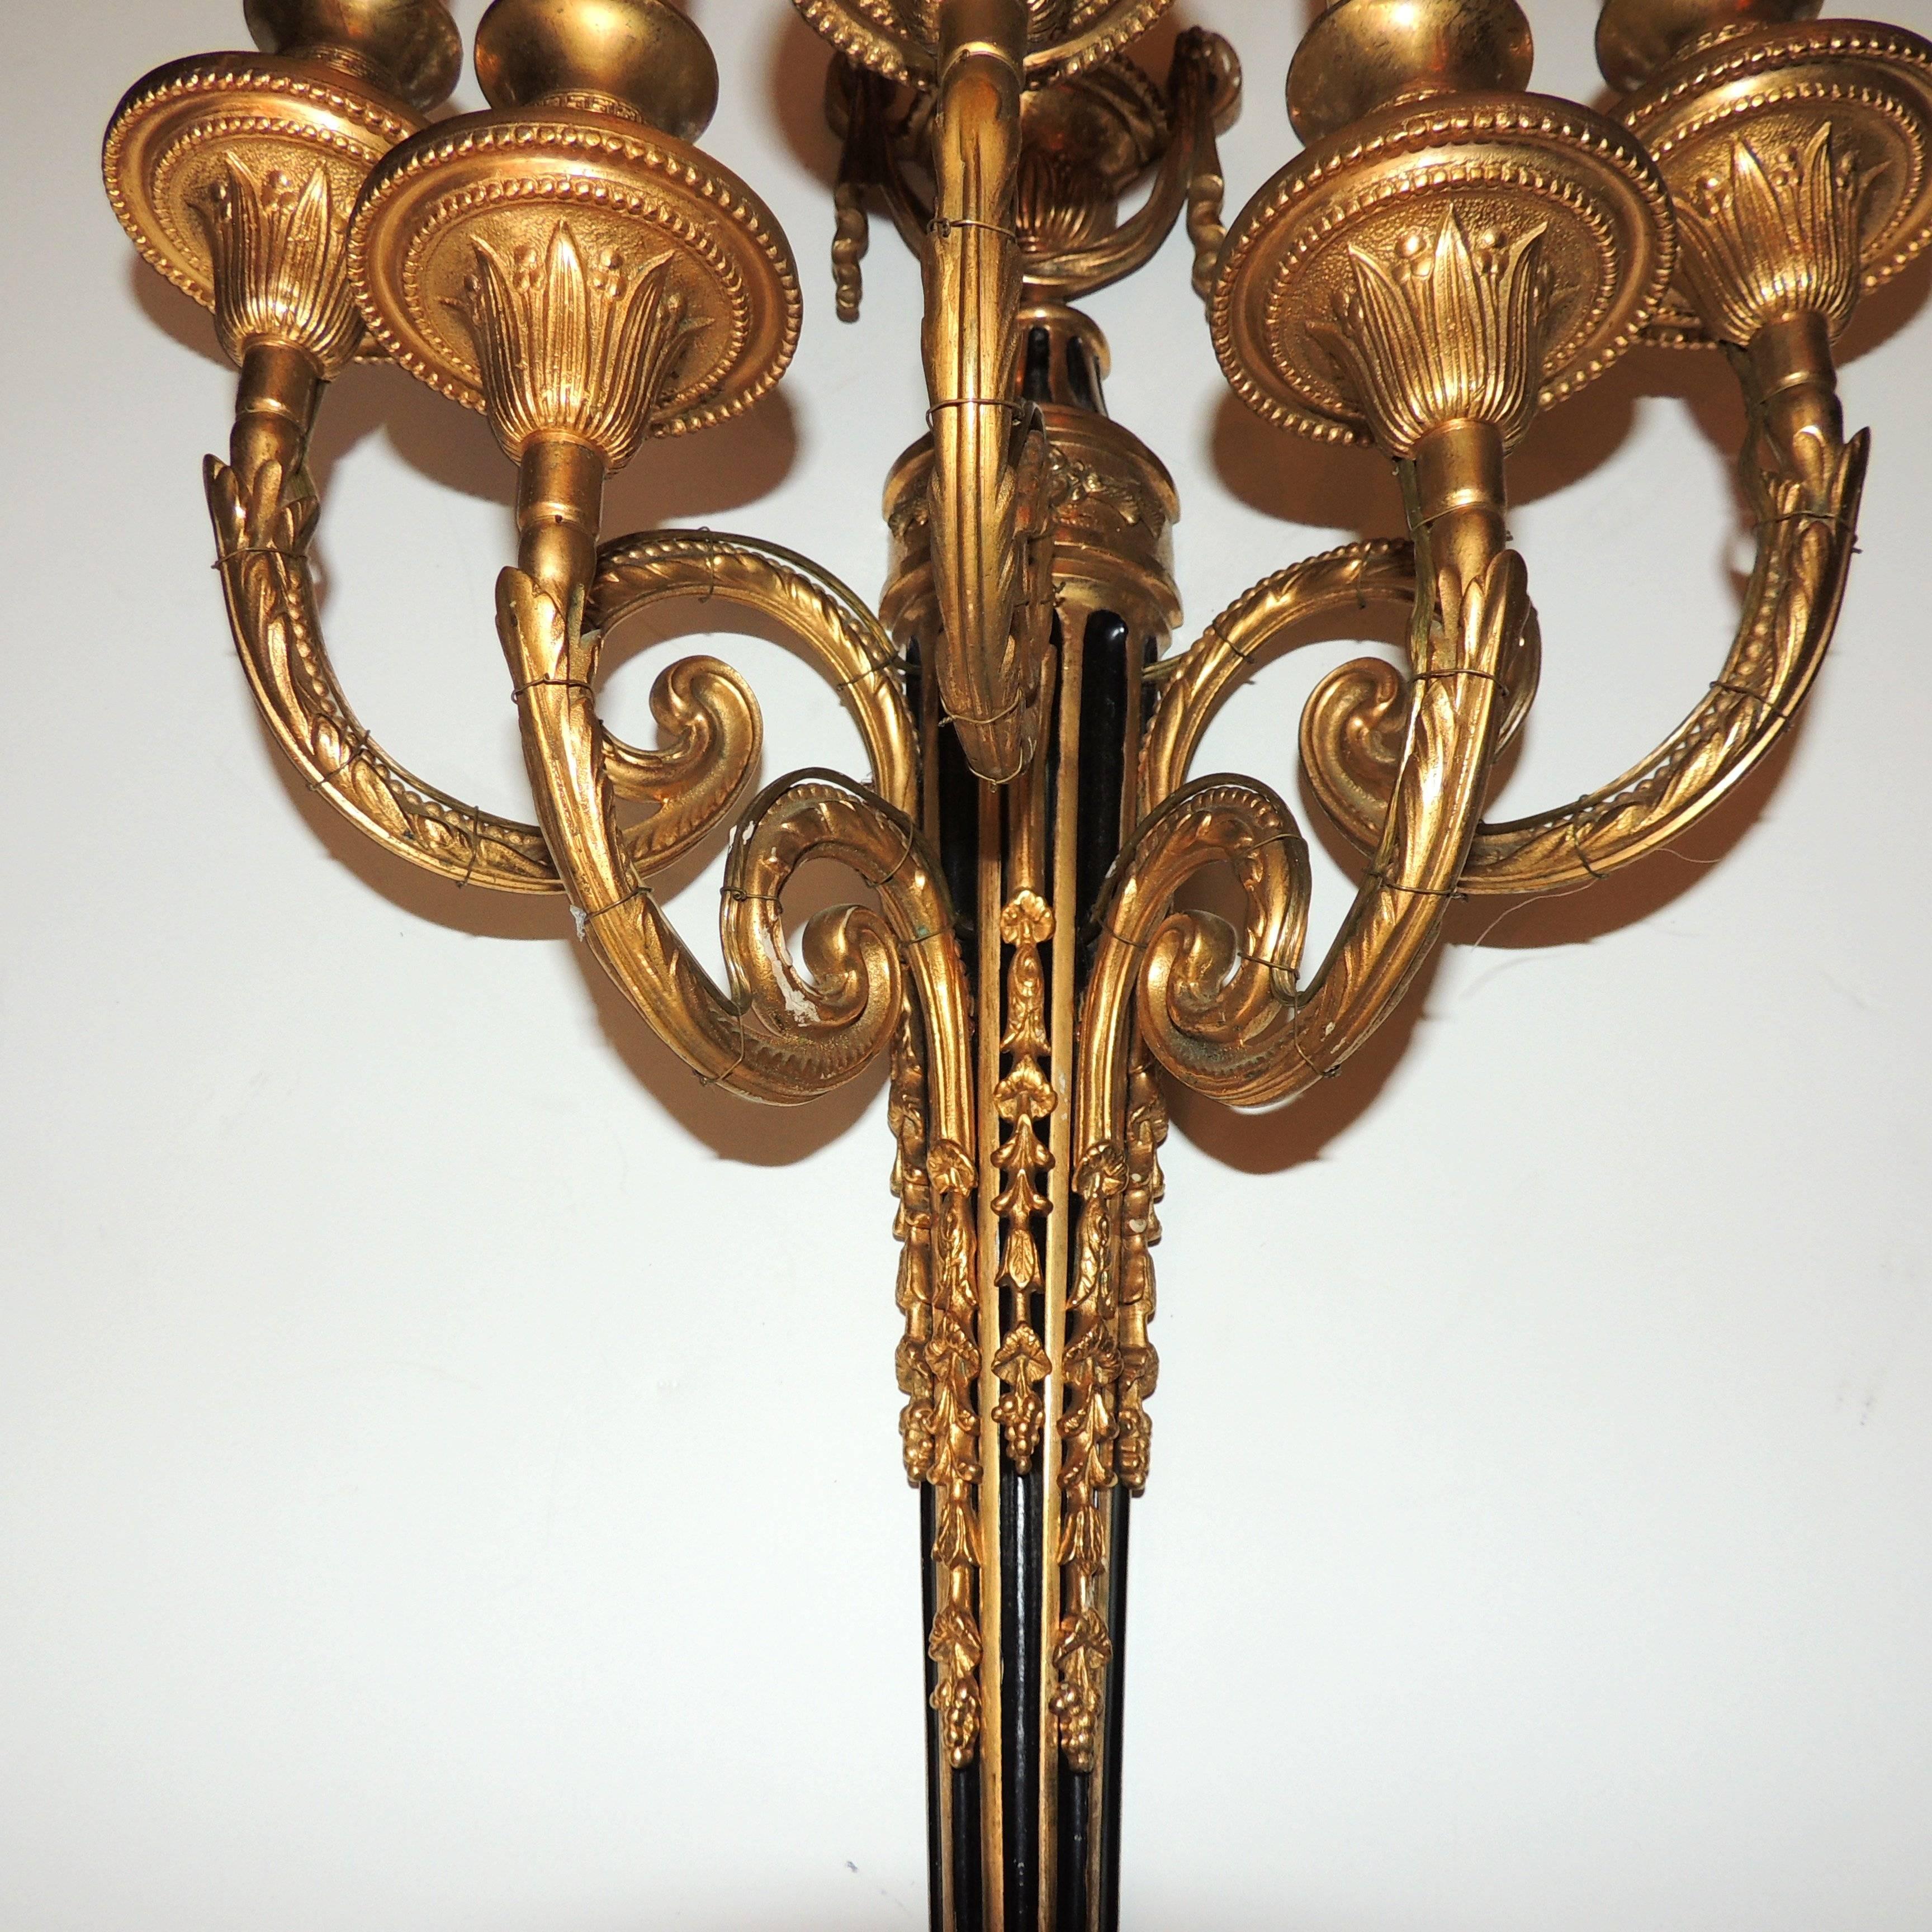 Mid-20th Century Wonderful Neoclassical Dore Bronze Patinated Five-Arm Urn Top Regency Sconce For Sale